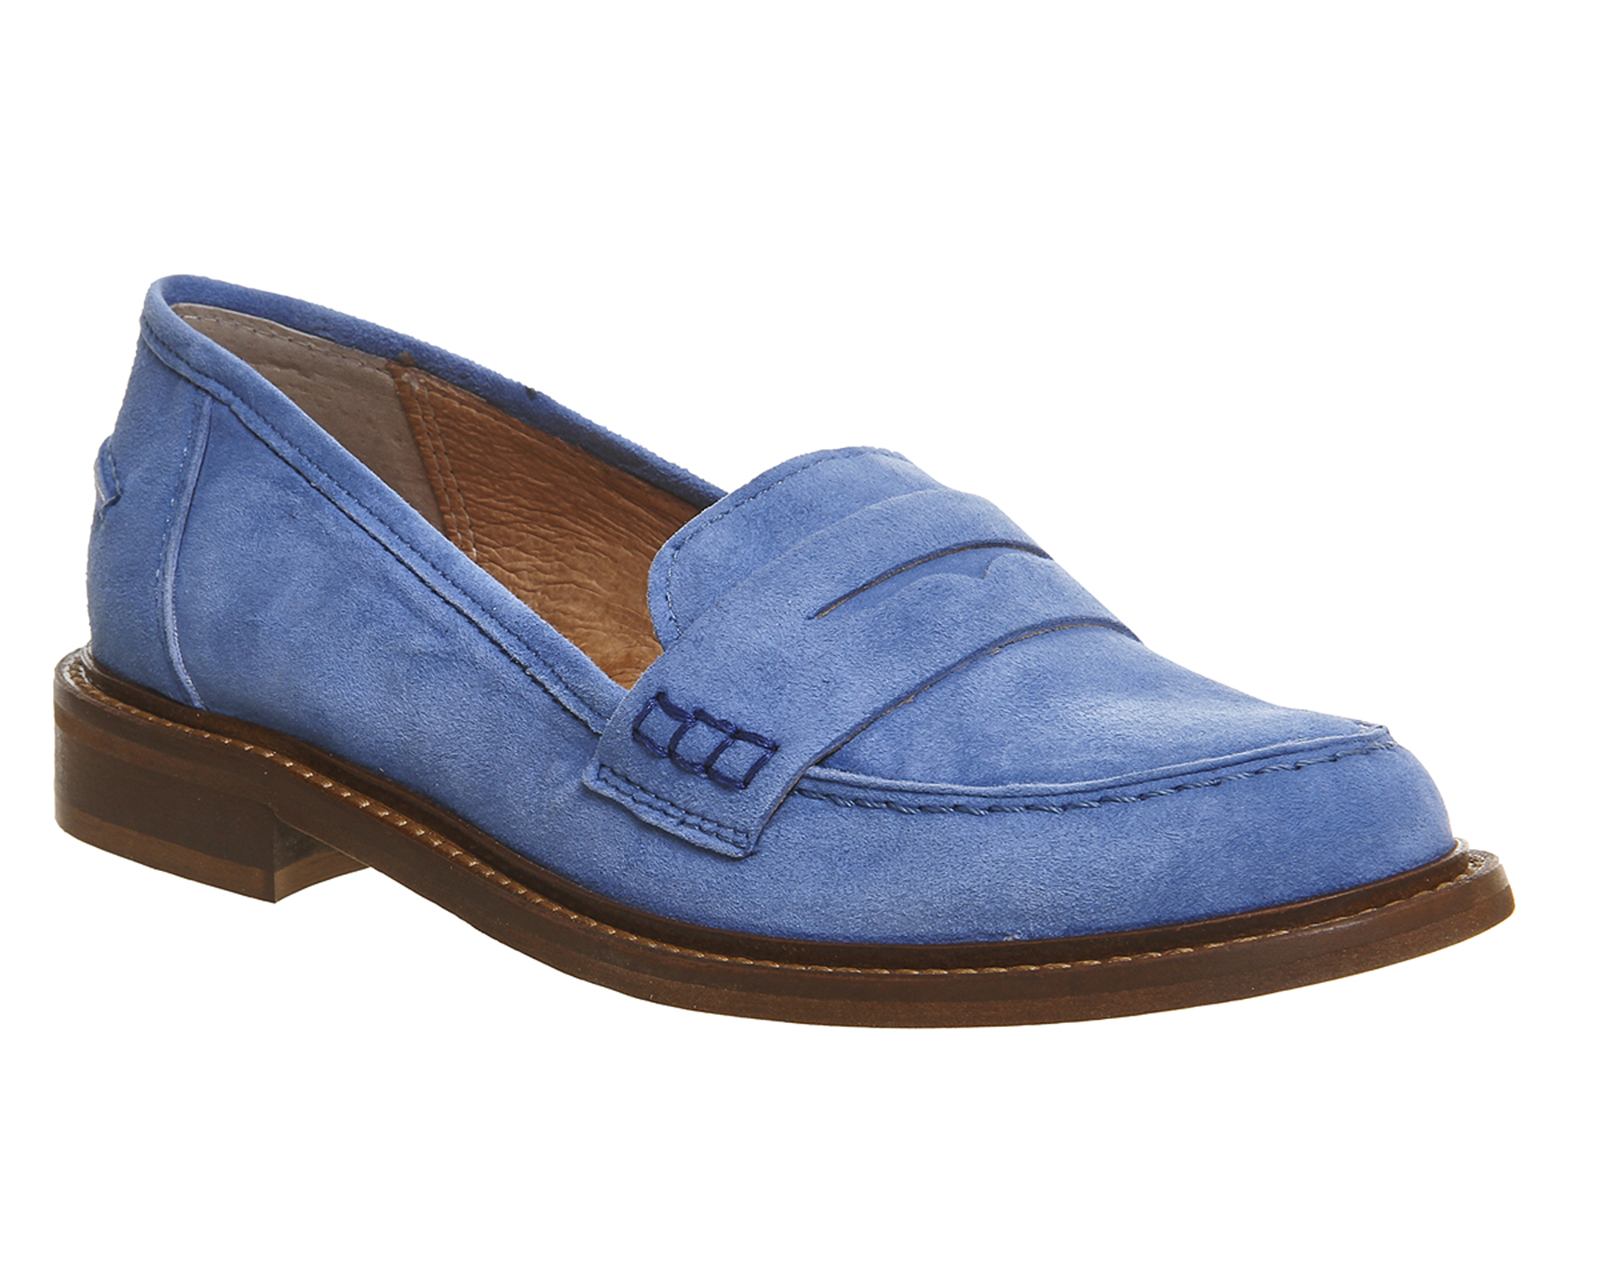 OFFICEDemanding Softy LoafersBlue Suede